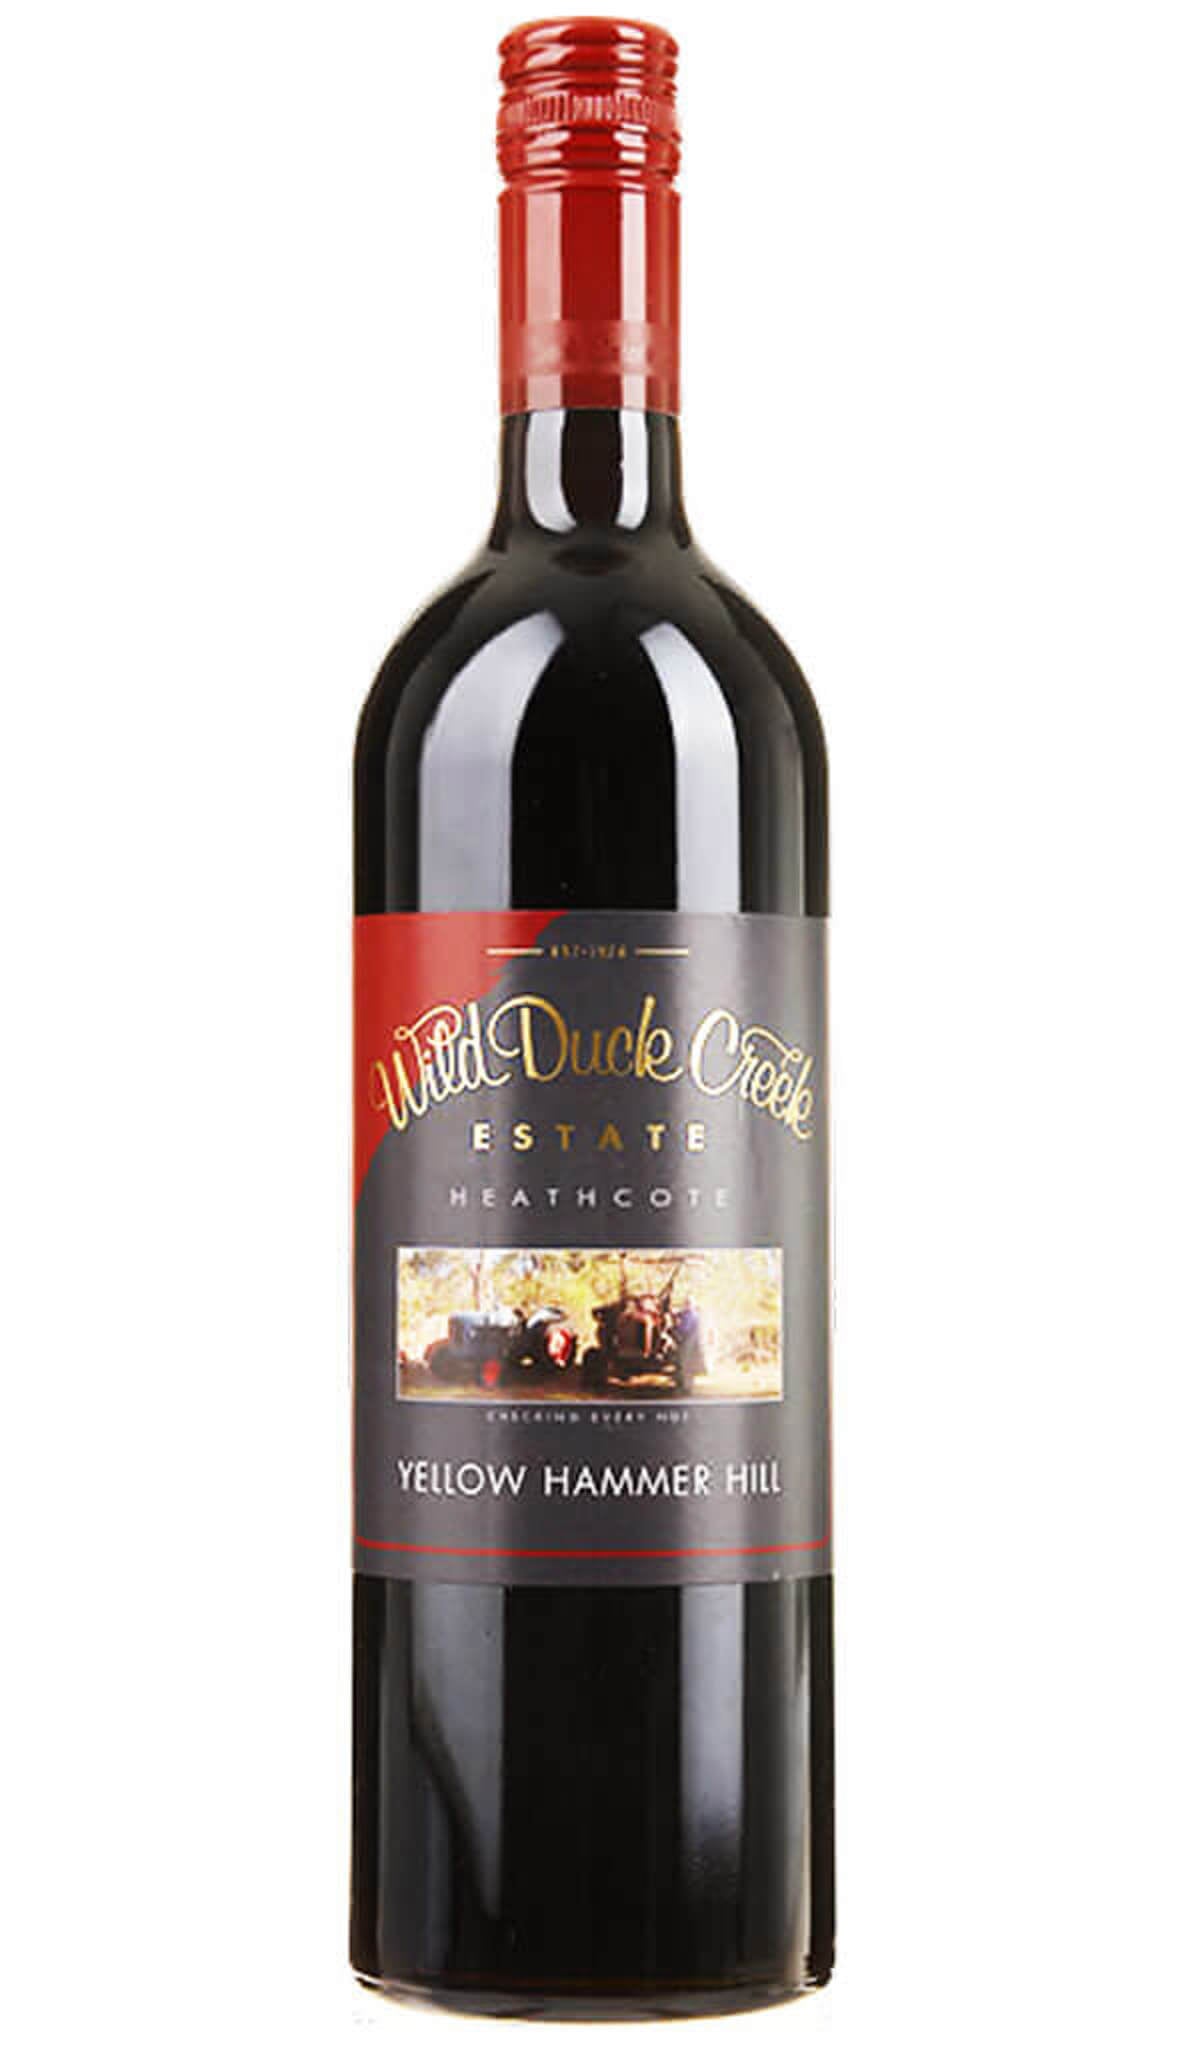 Find out more or buy Wild Duck Creek Yellow Hammer Hill SMC 2021 (Heathcote) online at Wine Sellers Direct - Australia’s independent liquor specialists.